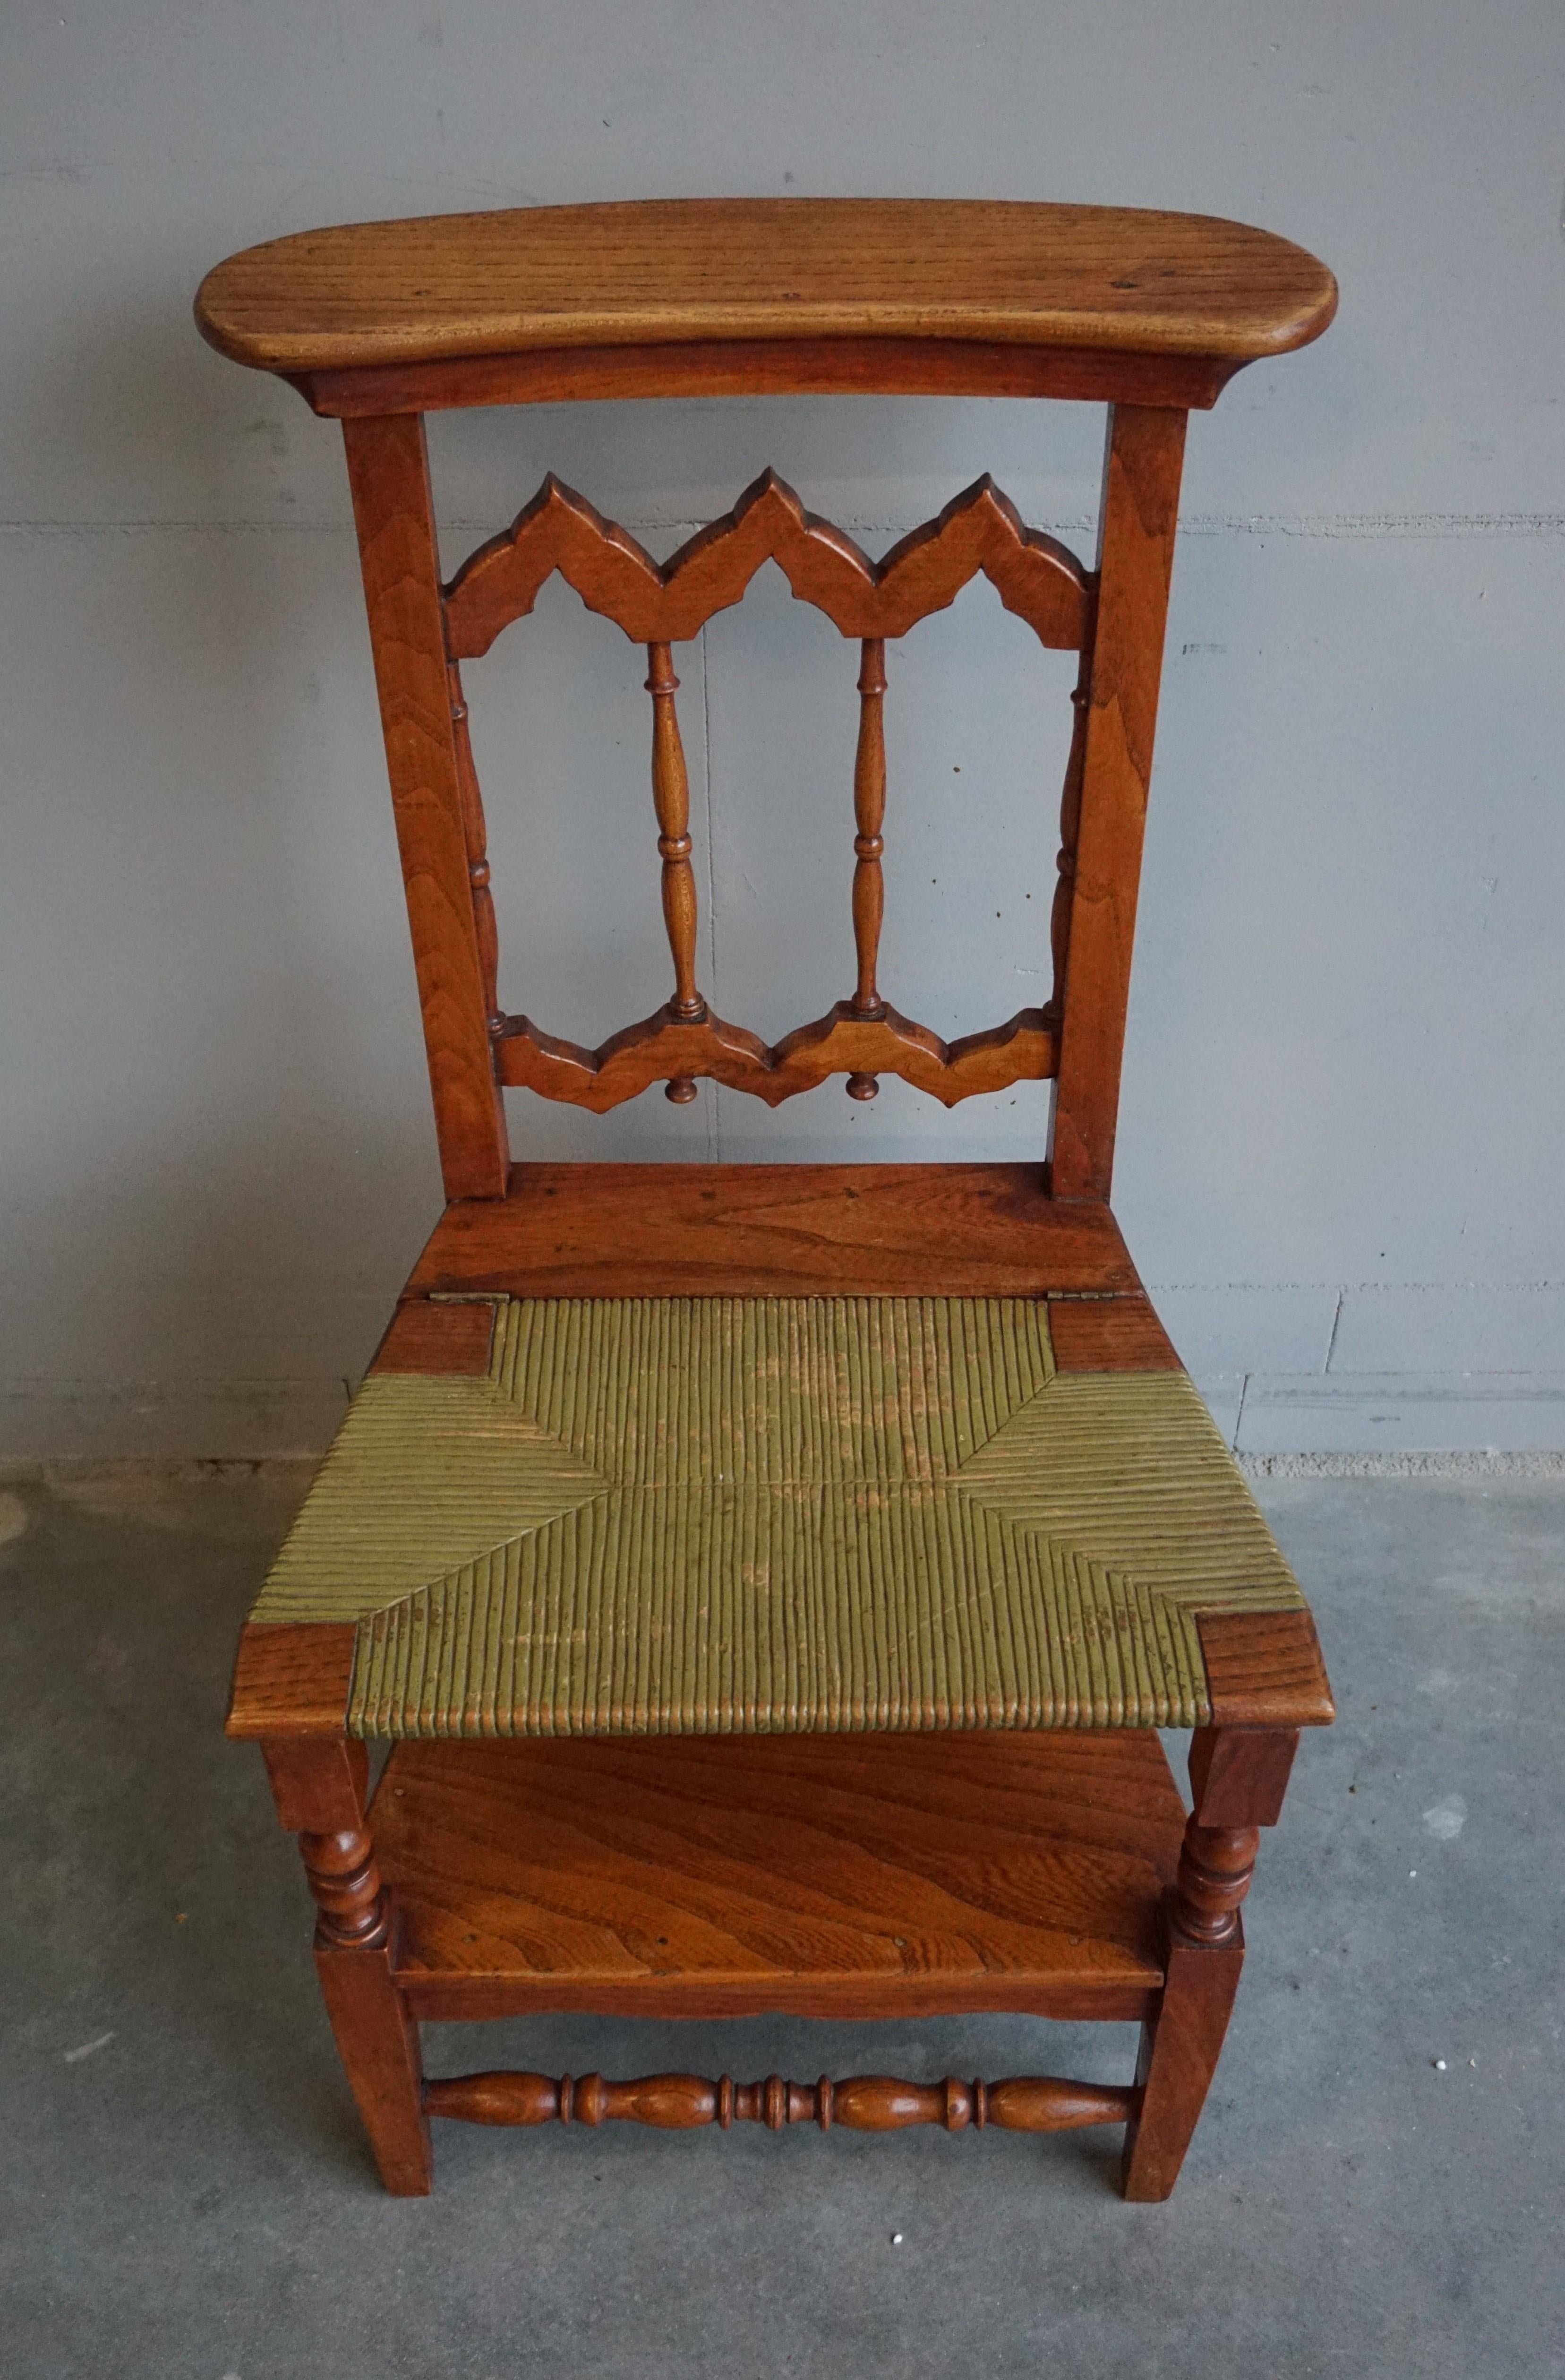 Finest quality crafted, Gothic Revival monks reading chair.

If you are looking for a stylish chair and a small library step into one then this handcrafted specimen could be perfect for you. This rare antique is made of solid elmwood only. This